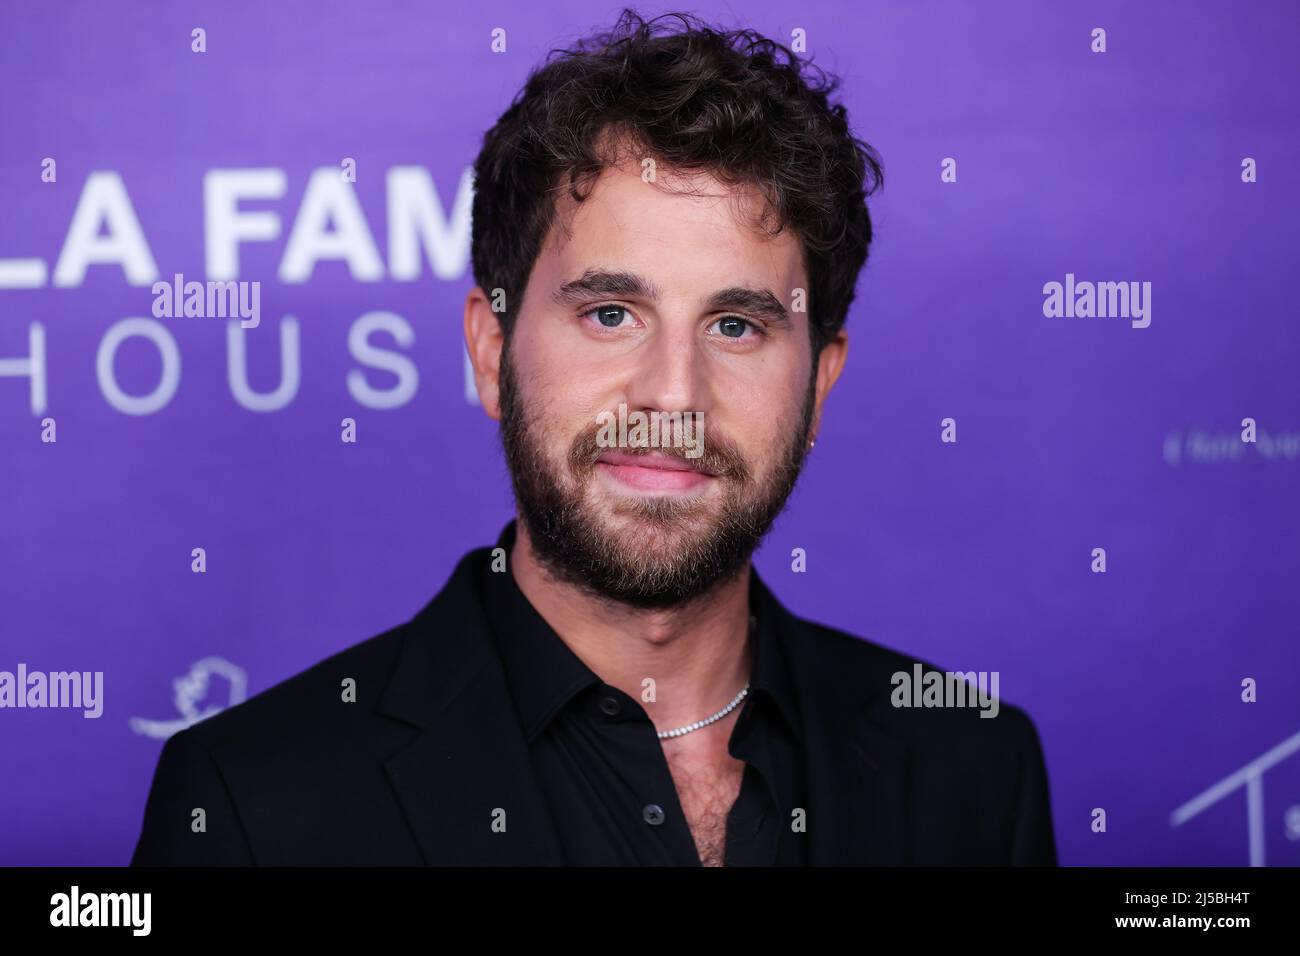 Hollywood, USA. 21st Apr, 2022. WEST HOLLYWOOD, LOS ANGELES, CALIFORNIA, USA - APRIL 21: American actor Ben Platt arrives at the LA Family Housing (LAFH) Awards 2022 held at the Pacific Design Center on April 21, 2022 in West Hollywood, Los Angeles, California, United States. (Photo by Xavier Collin/Image Press Agency) Credit: Image Press Agency/Alamy Live News Stock Photo